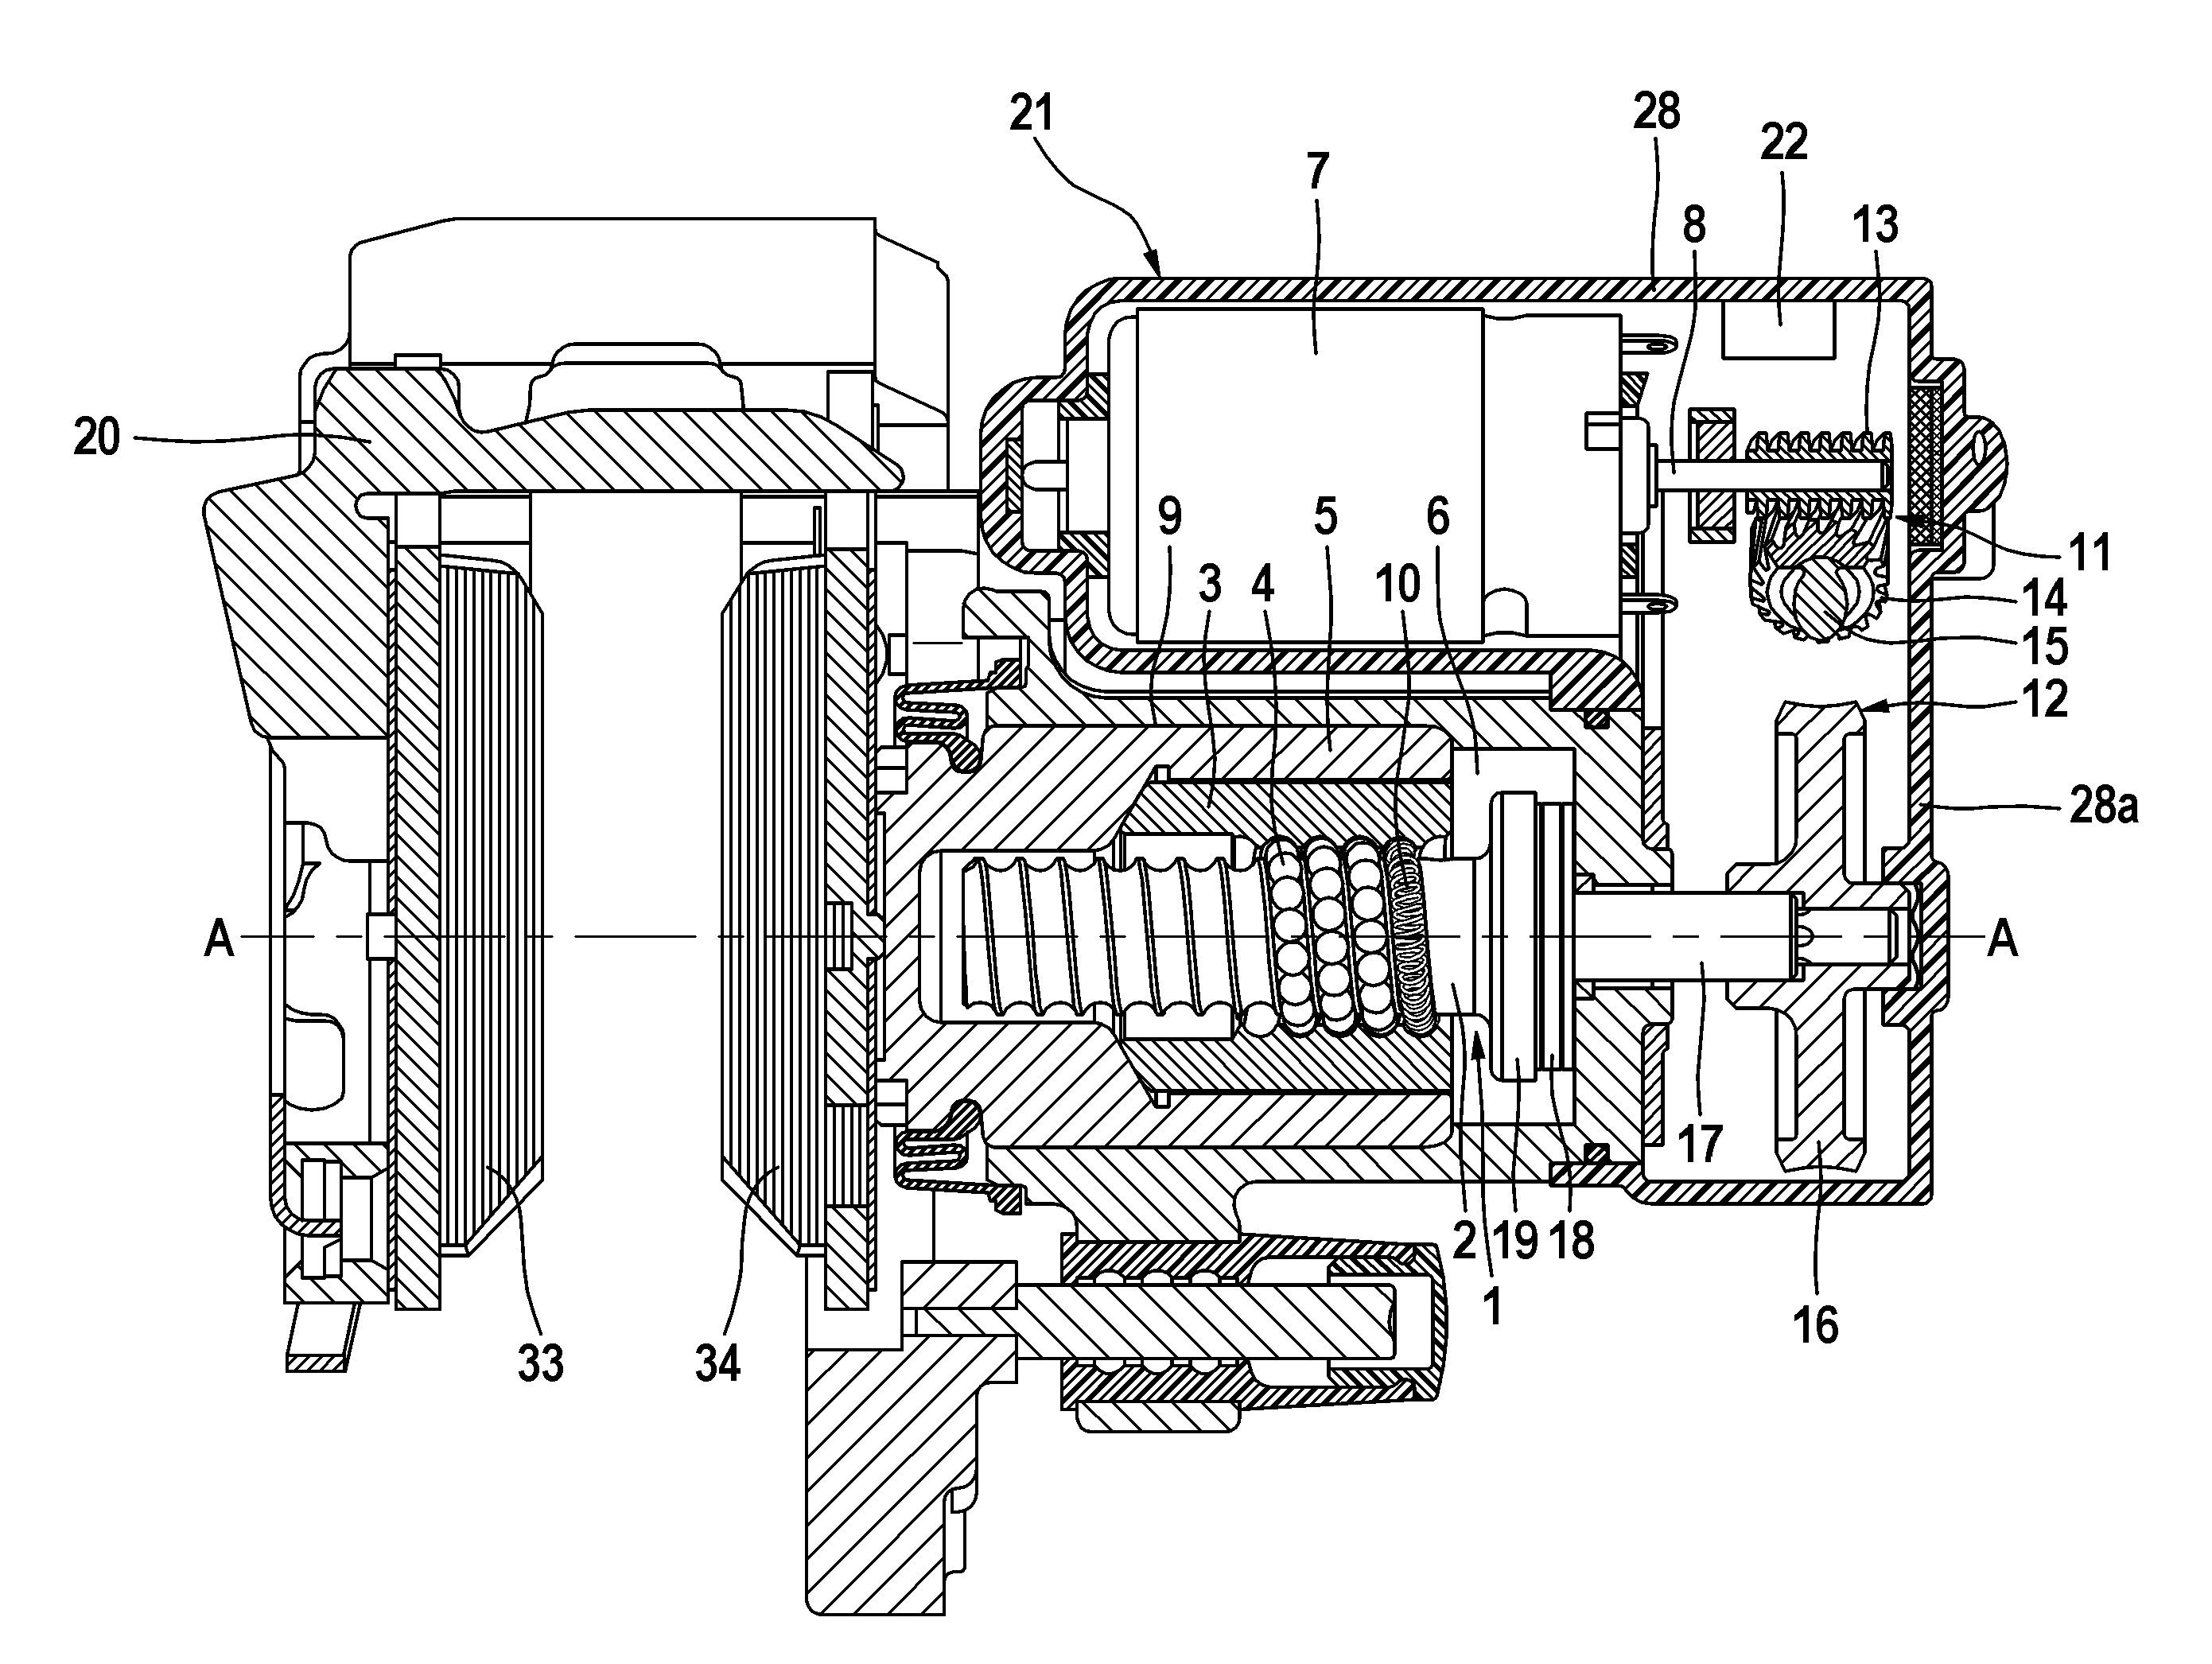 Method for the secured release of an electromechanically actuable parking brake